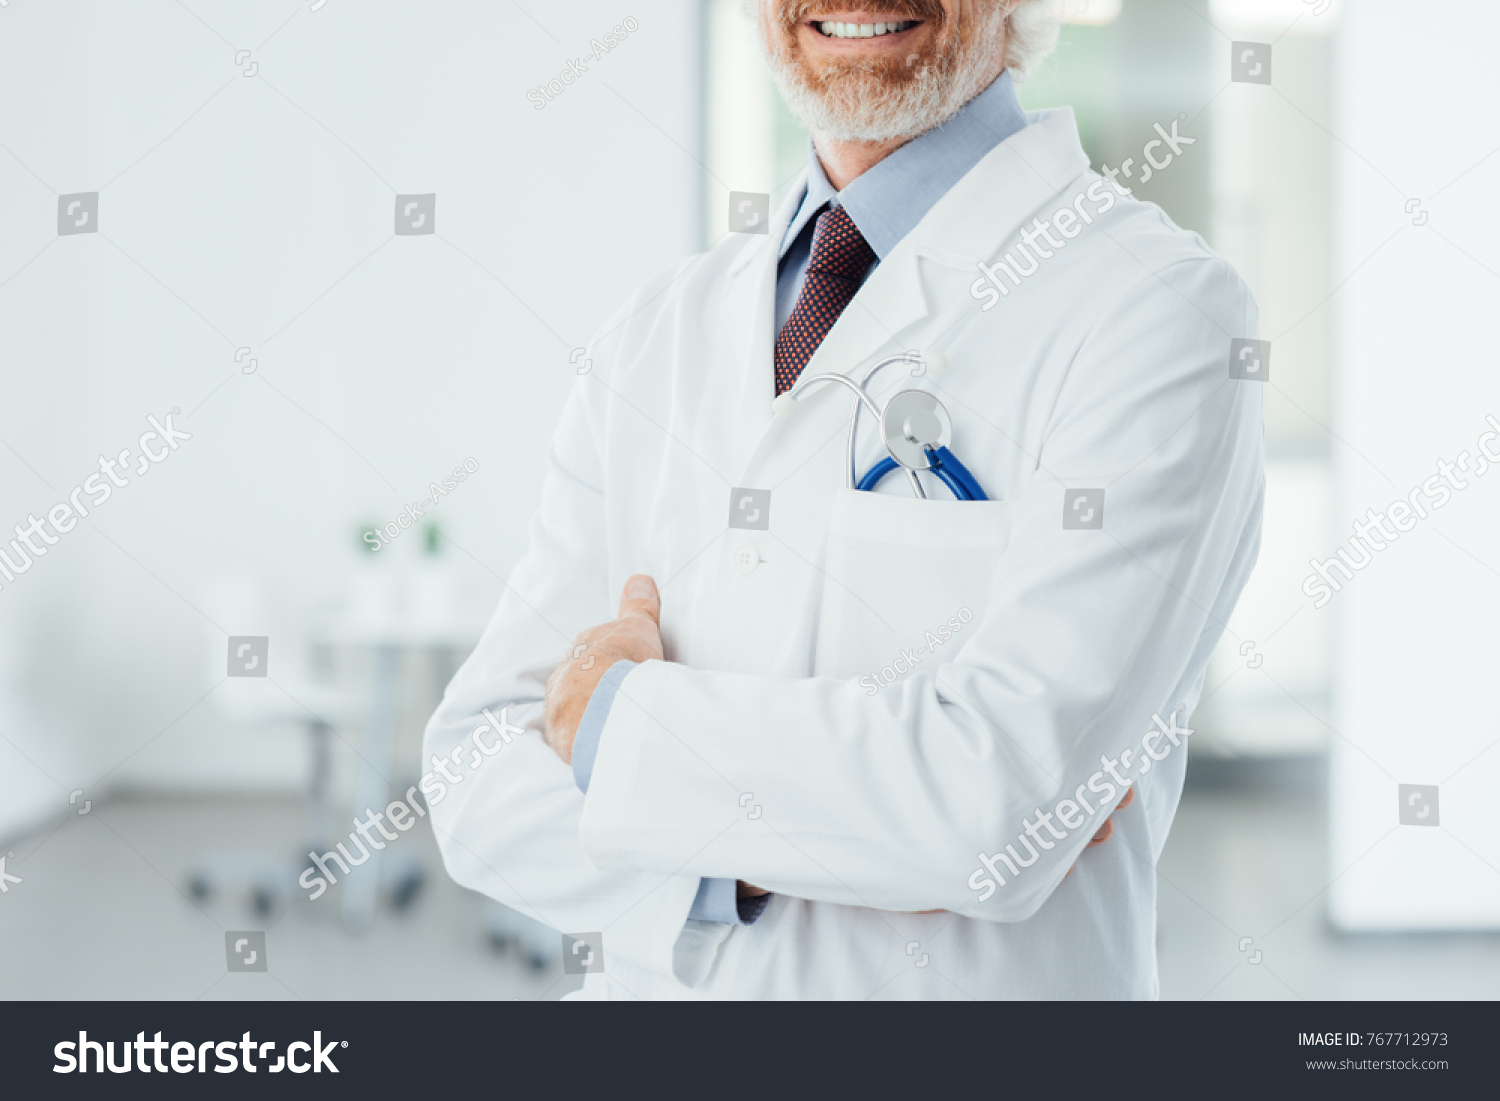 Confident doctor at hospital posing with folded arms and smiling at camera #767712973